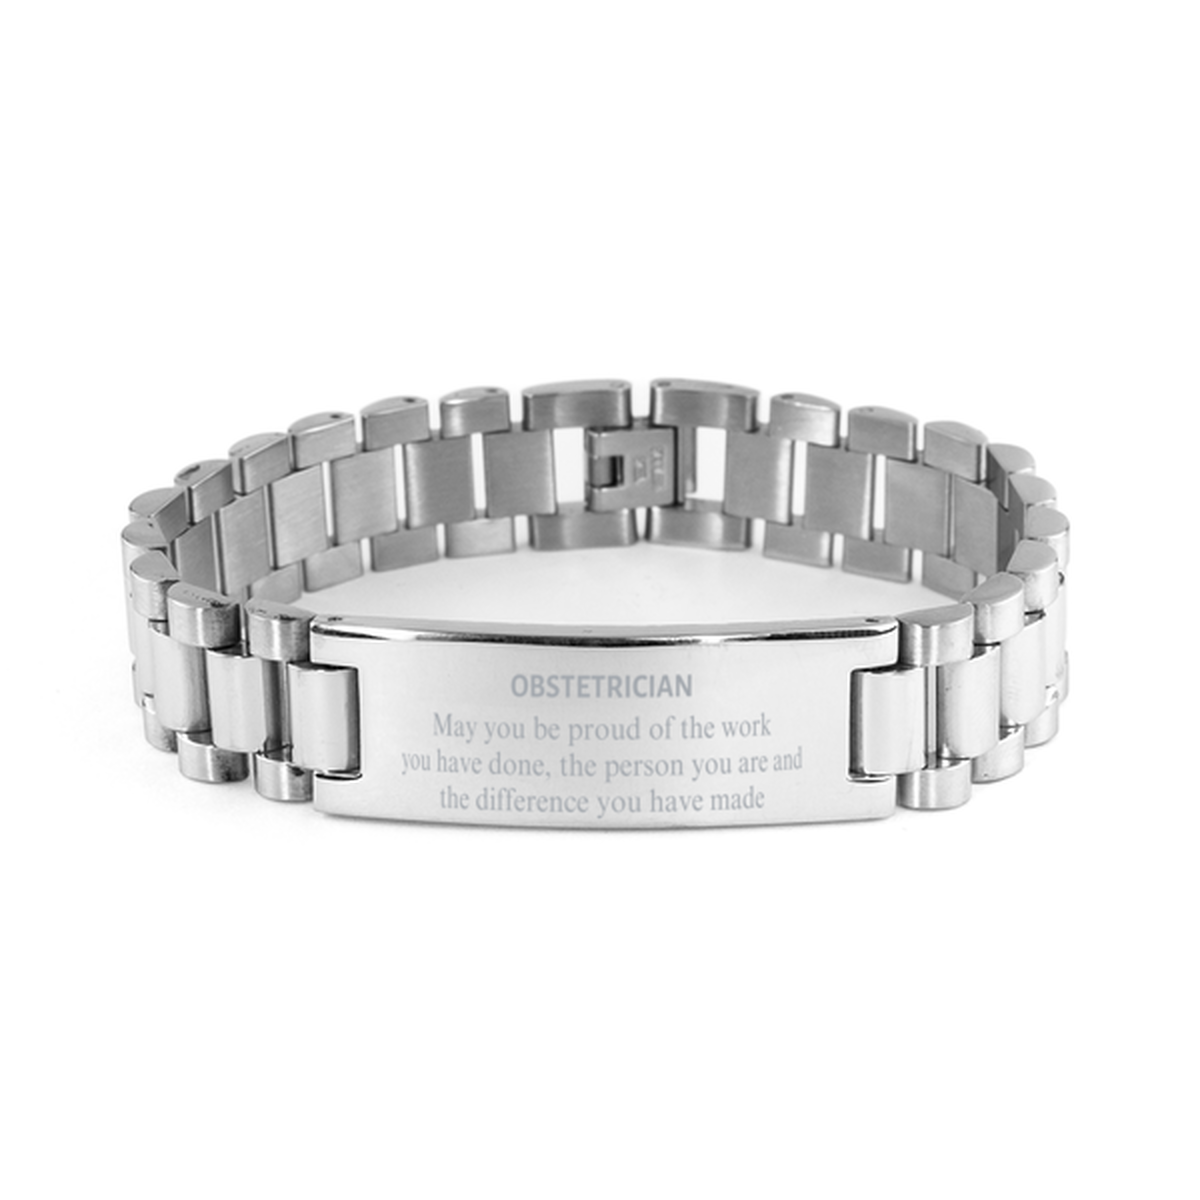 Obstetrician May you be proud of the work you have done, Retirement Obstetrician Ladder Stainless Steel Bracelet for Colleague Appreciation Gifts Amazing for Obstetrician